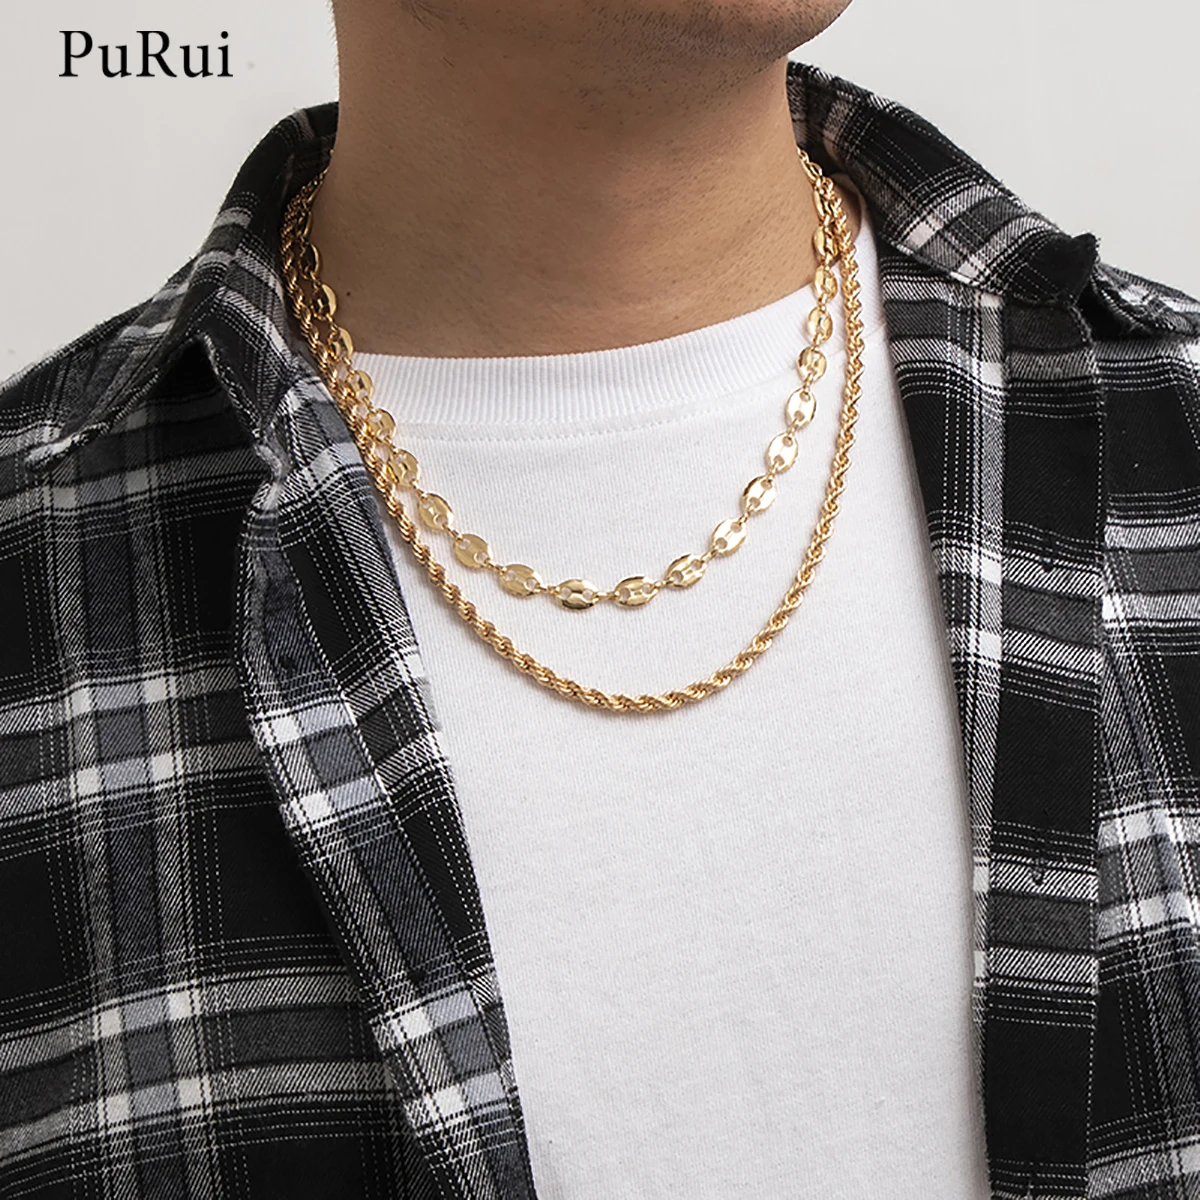 

PuRui 2Pcs/Set Steampunk Pig Nose Iron Material Chain Choker Necklace Hip Hop Double Strand Twisted Clavicle Chains For Women